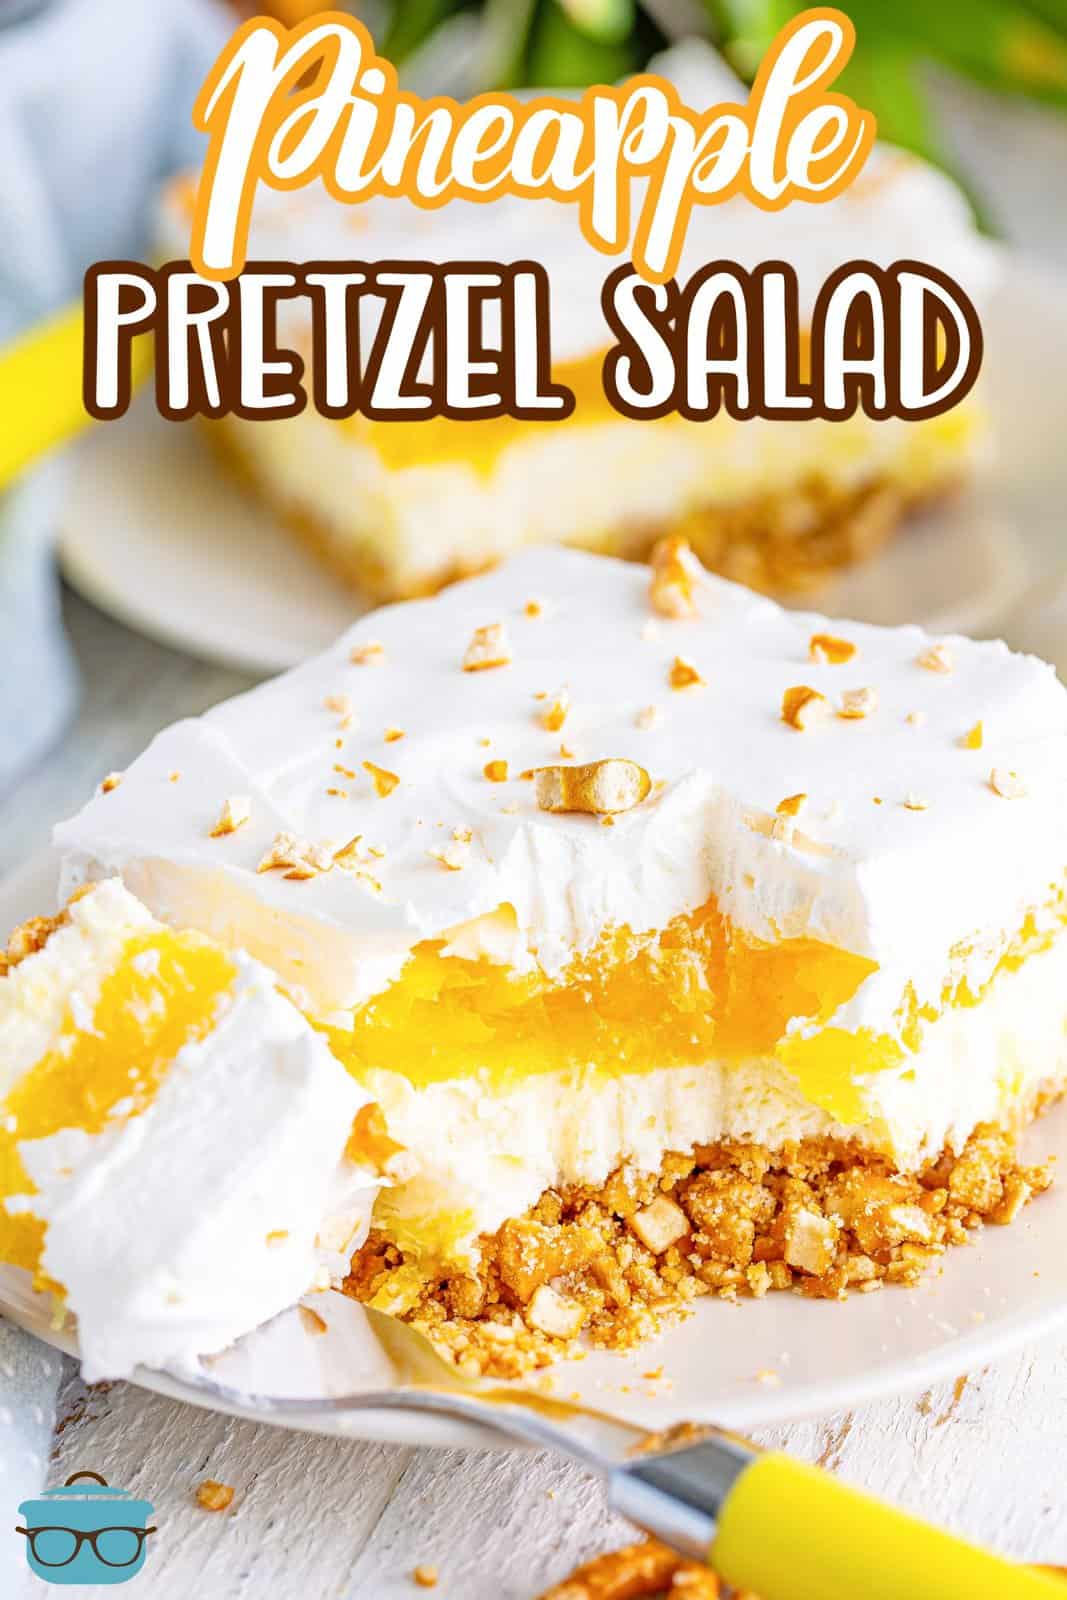 A square of Pineapple Pretzel Salad with a bite missing.